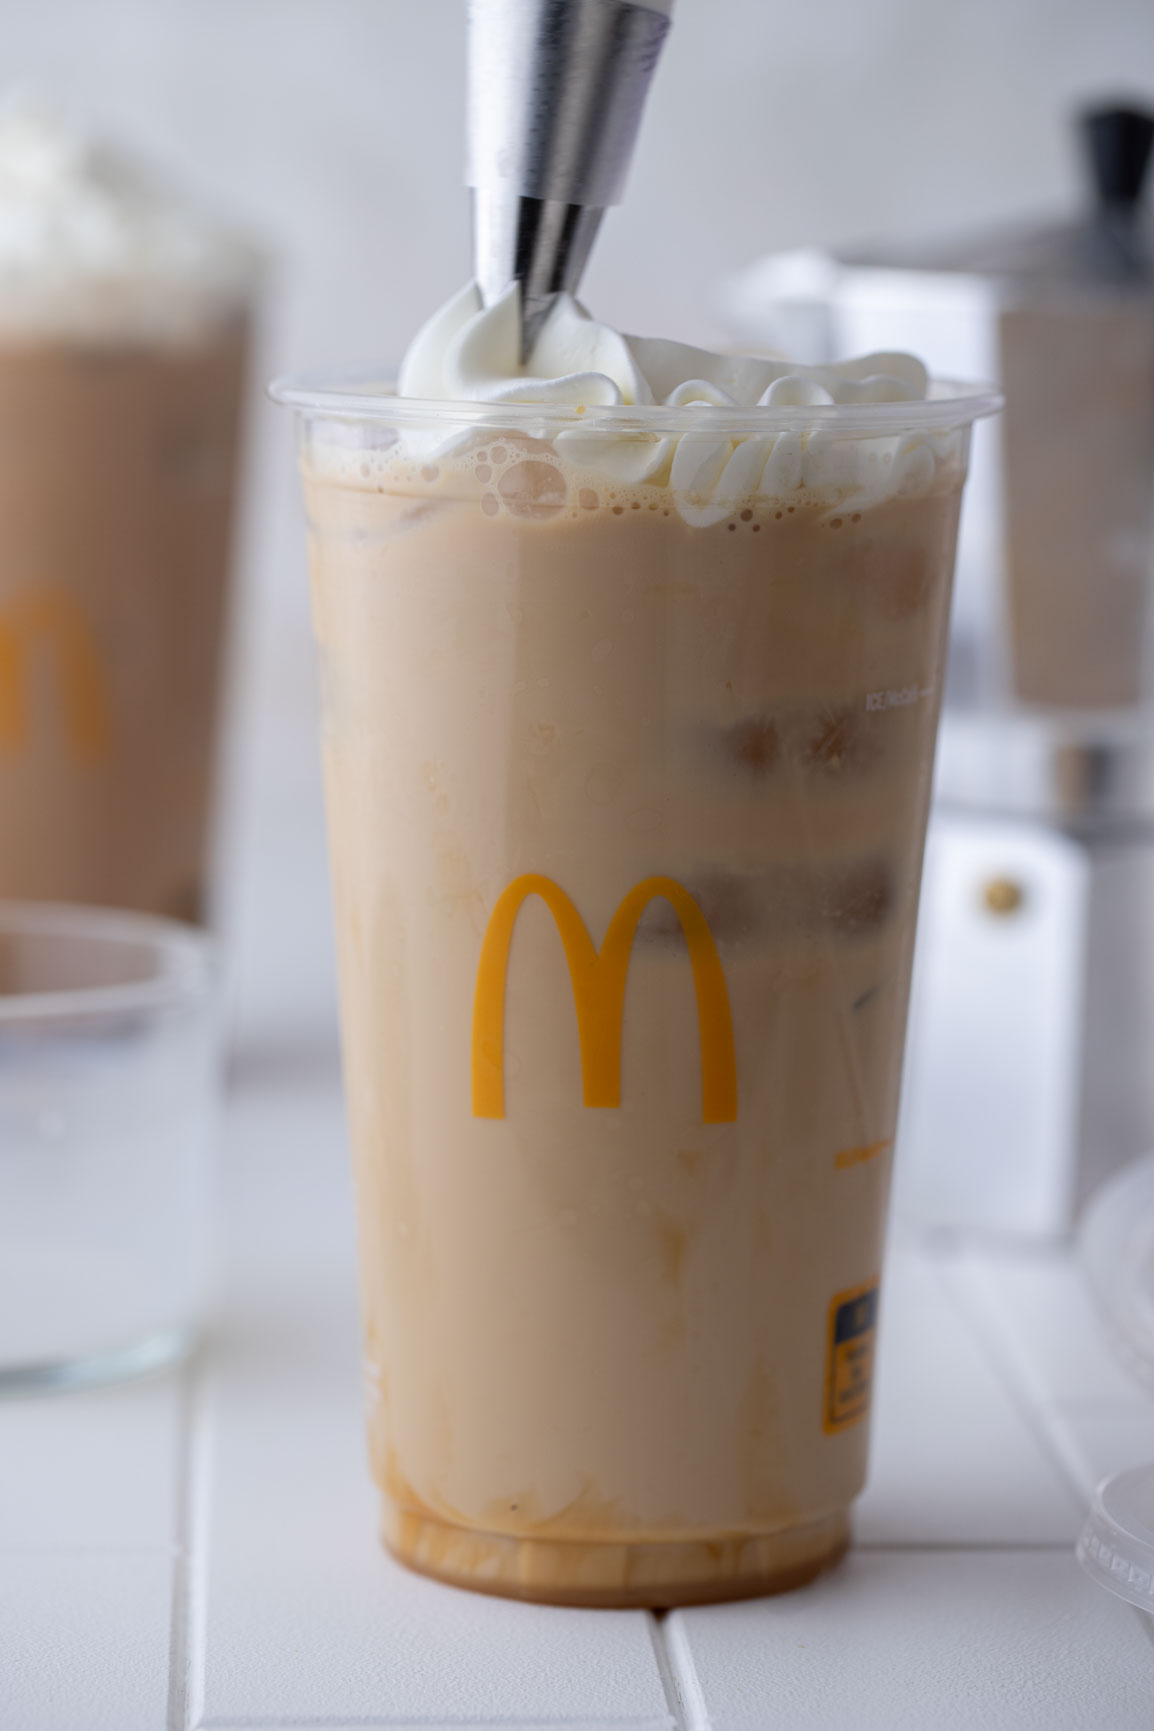 the cup of mcdonald's caramel iced coffee being topped with whipped cream